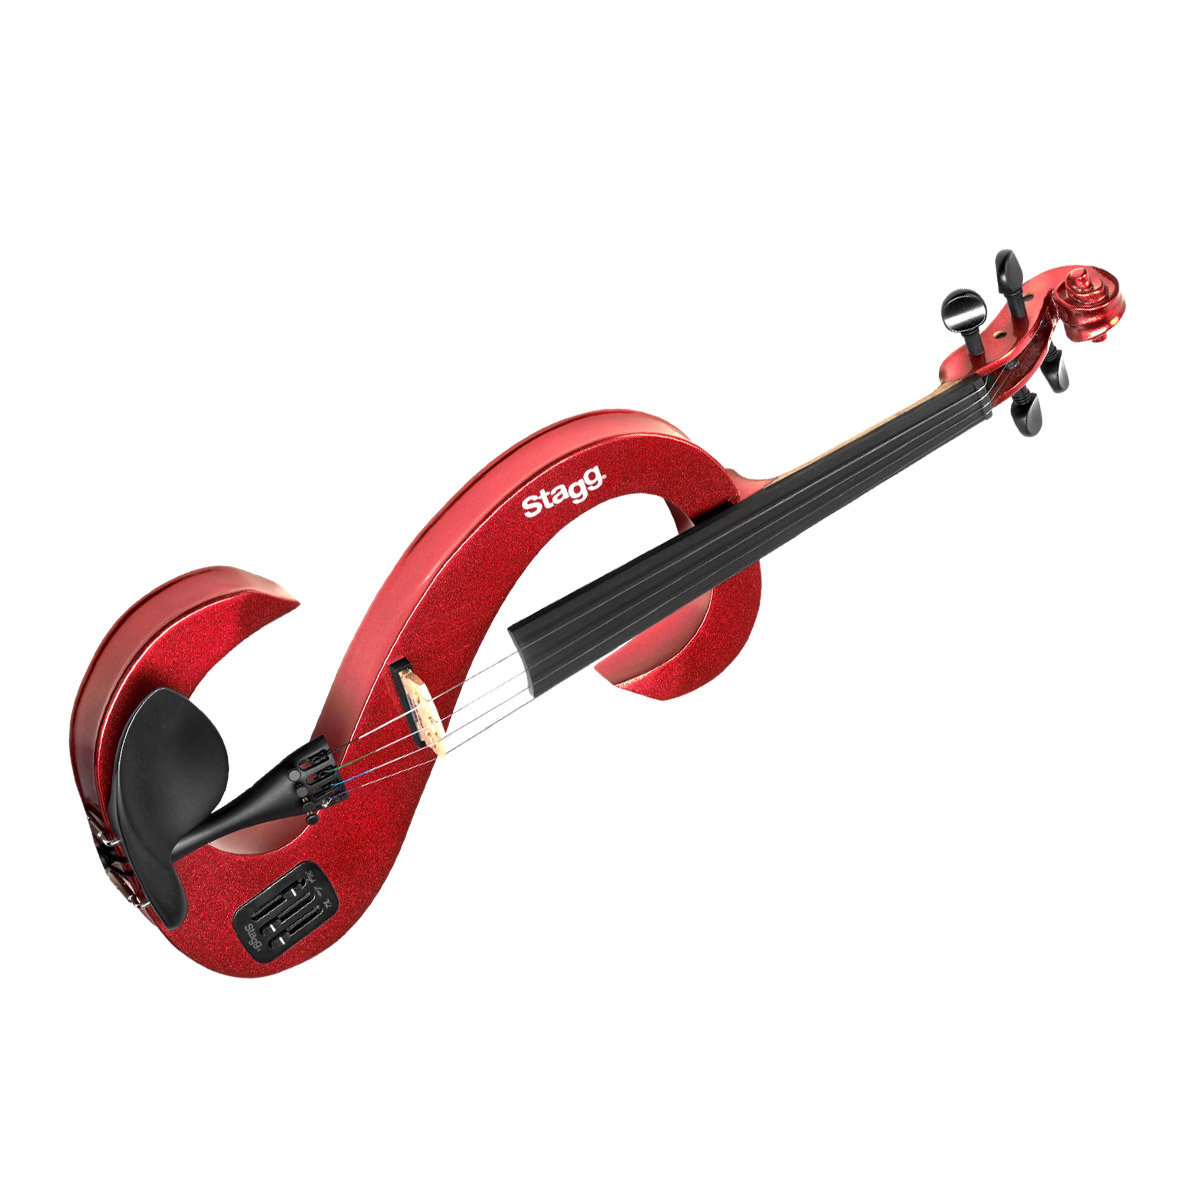 Electric violin. Stagg r500. Stagg SHOMOH. Stagg Set-Plus. Stagg Combo 20 AA R.